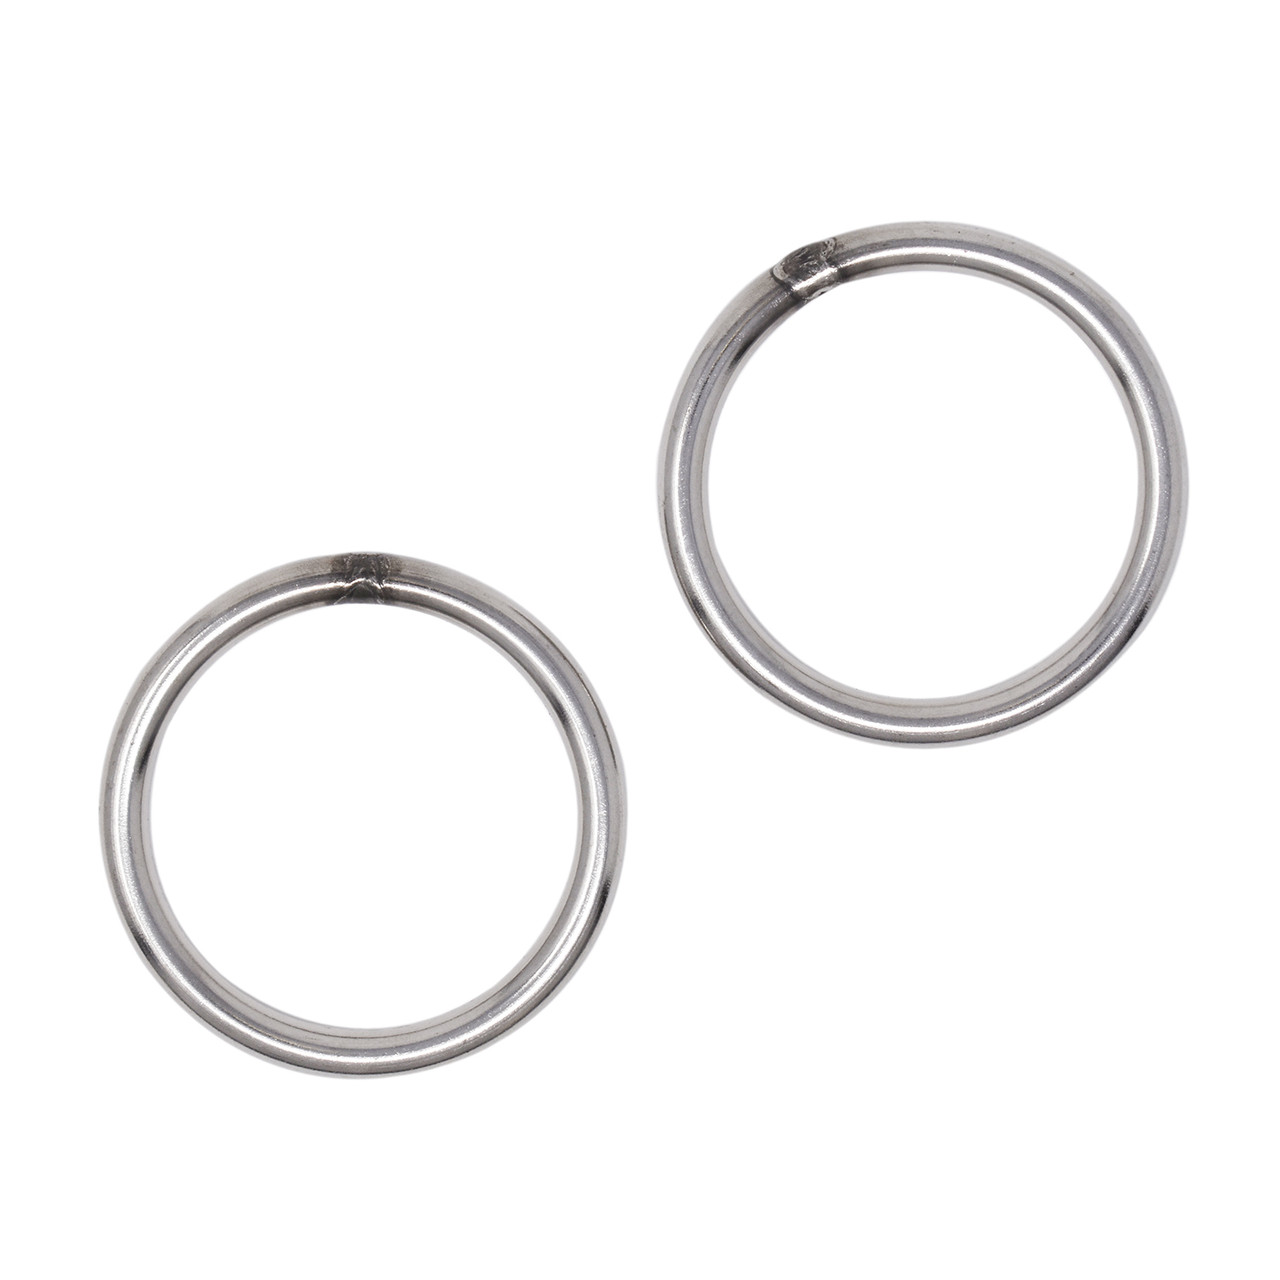 Scuba Diving 24mm Stainless Steel 1.6mm Split Ring for BCD attachment 10pc 